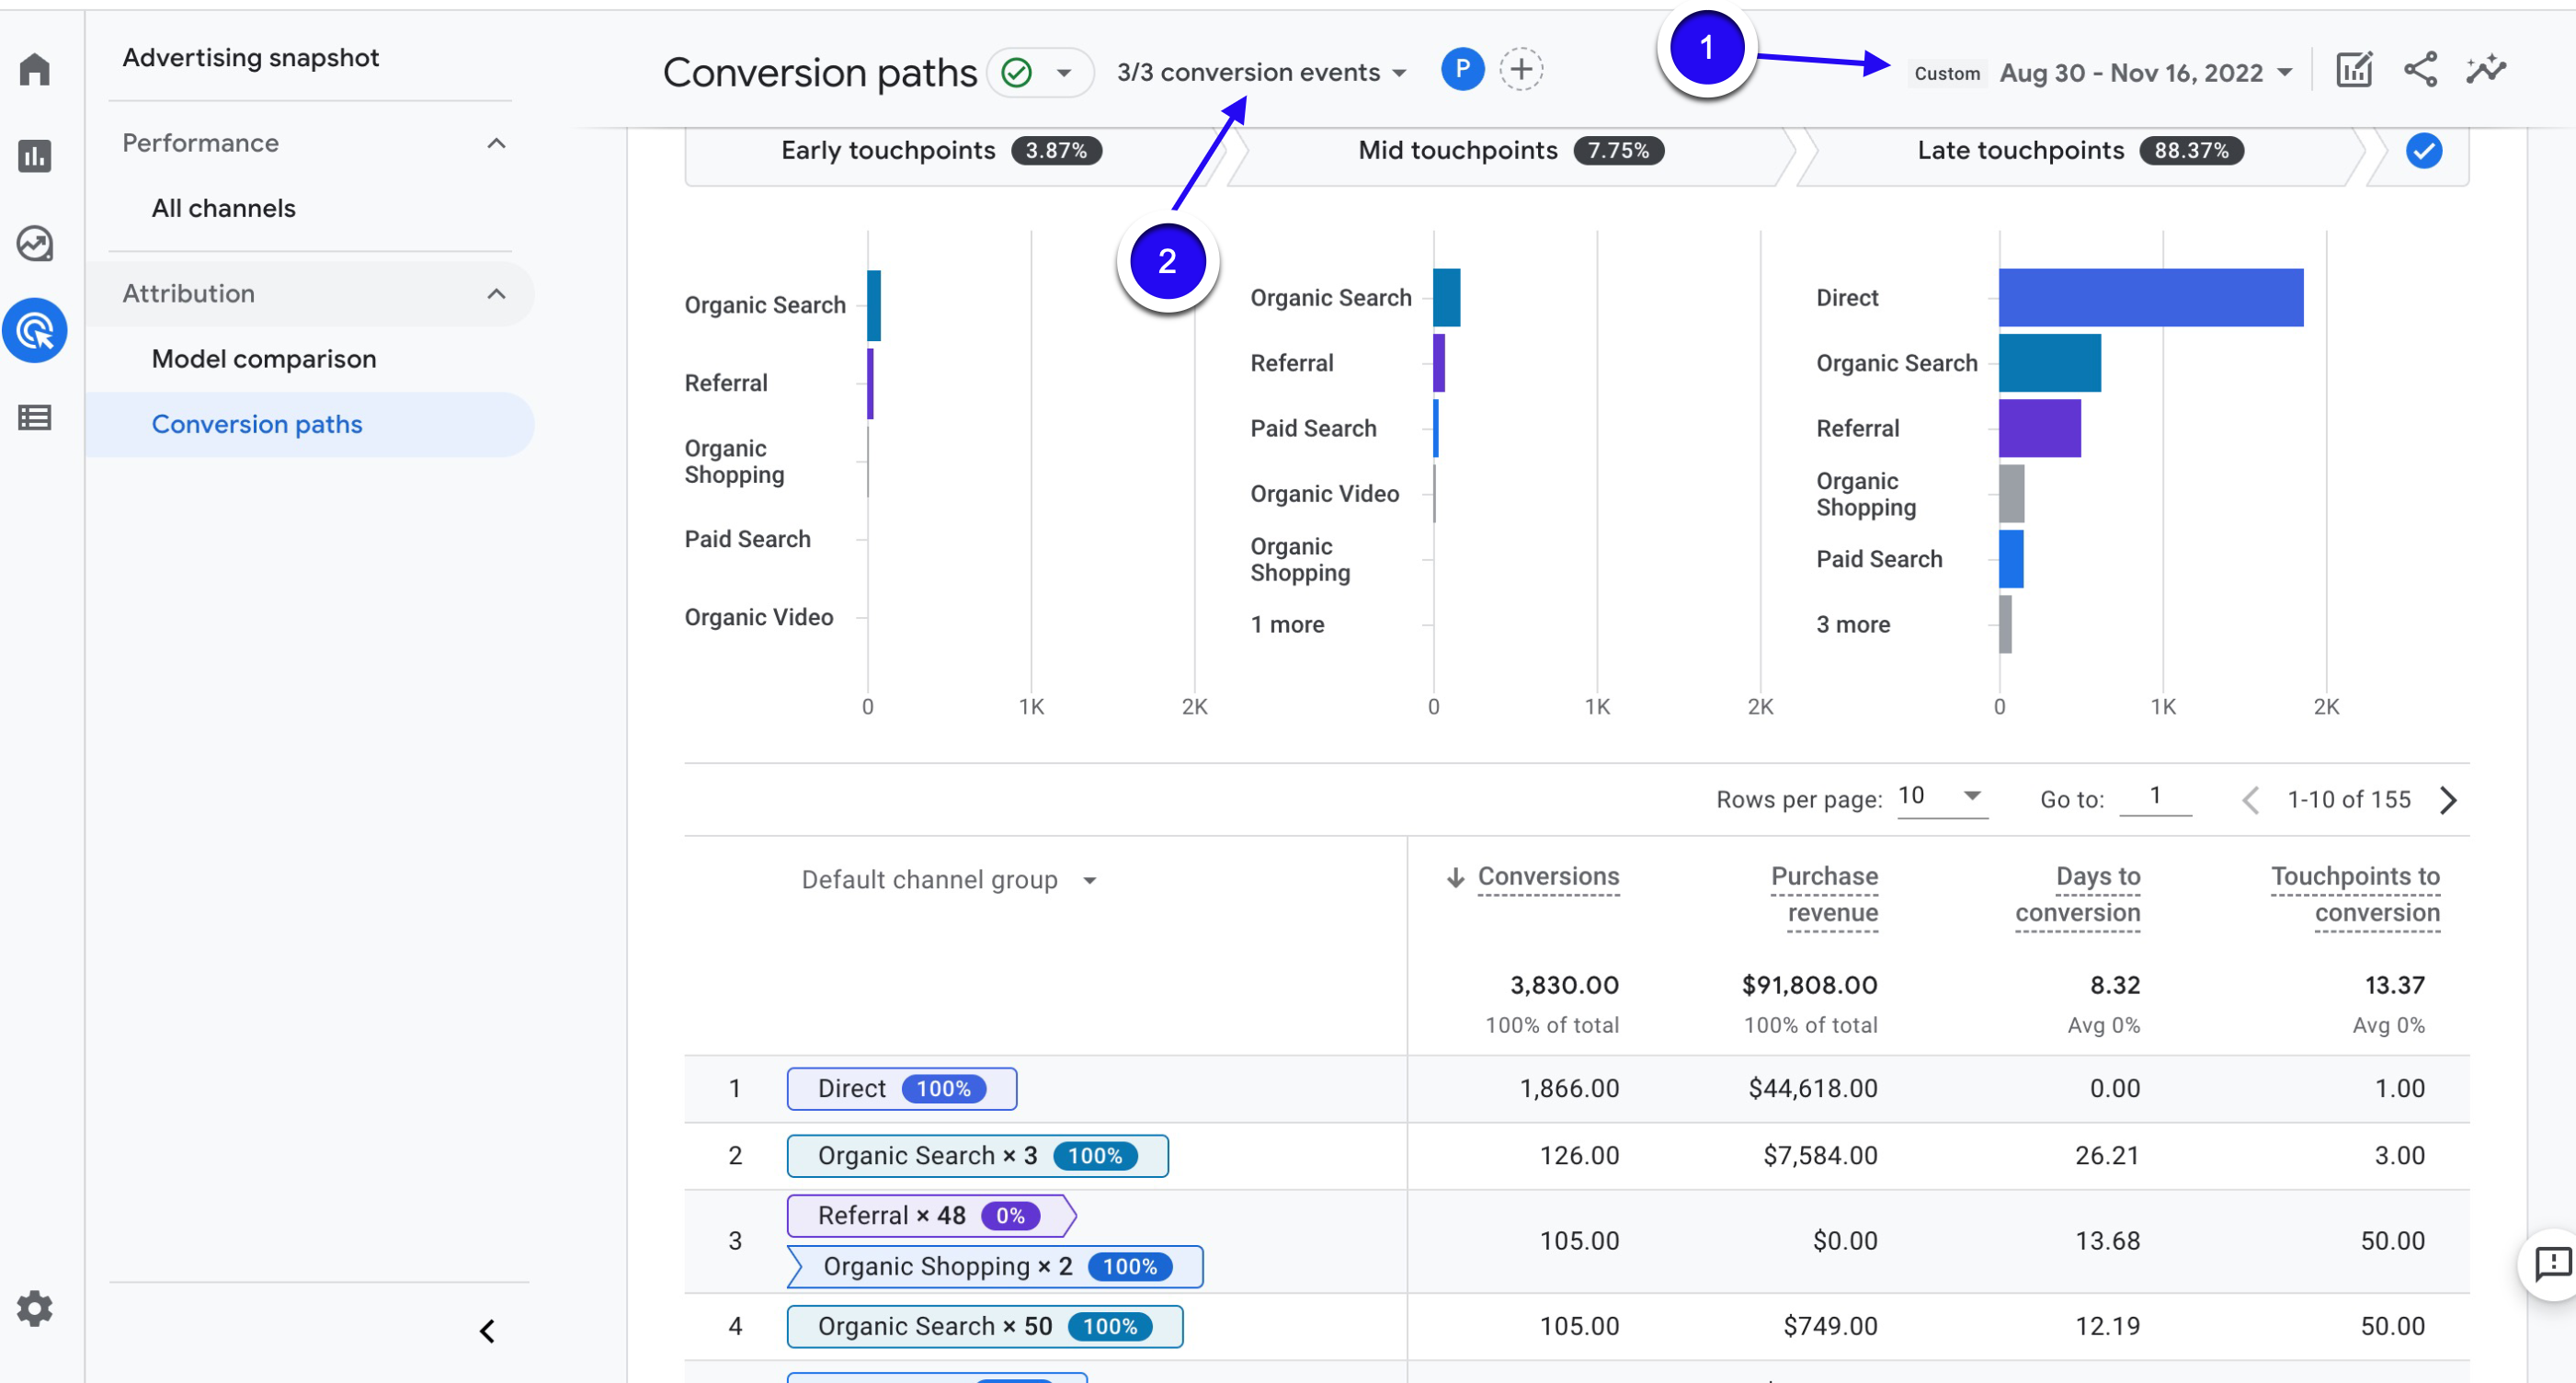 Compare the conversion paths